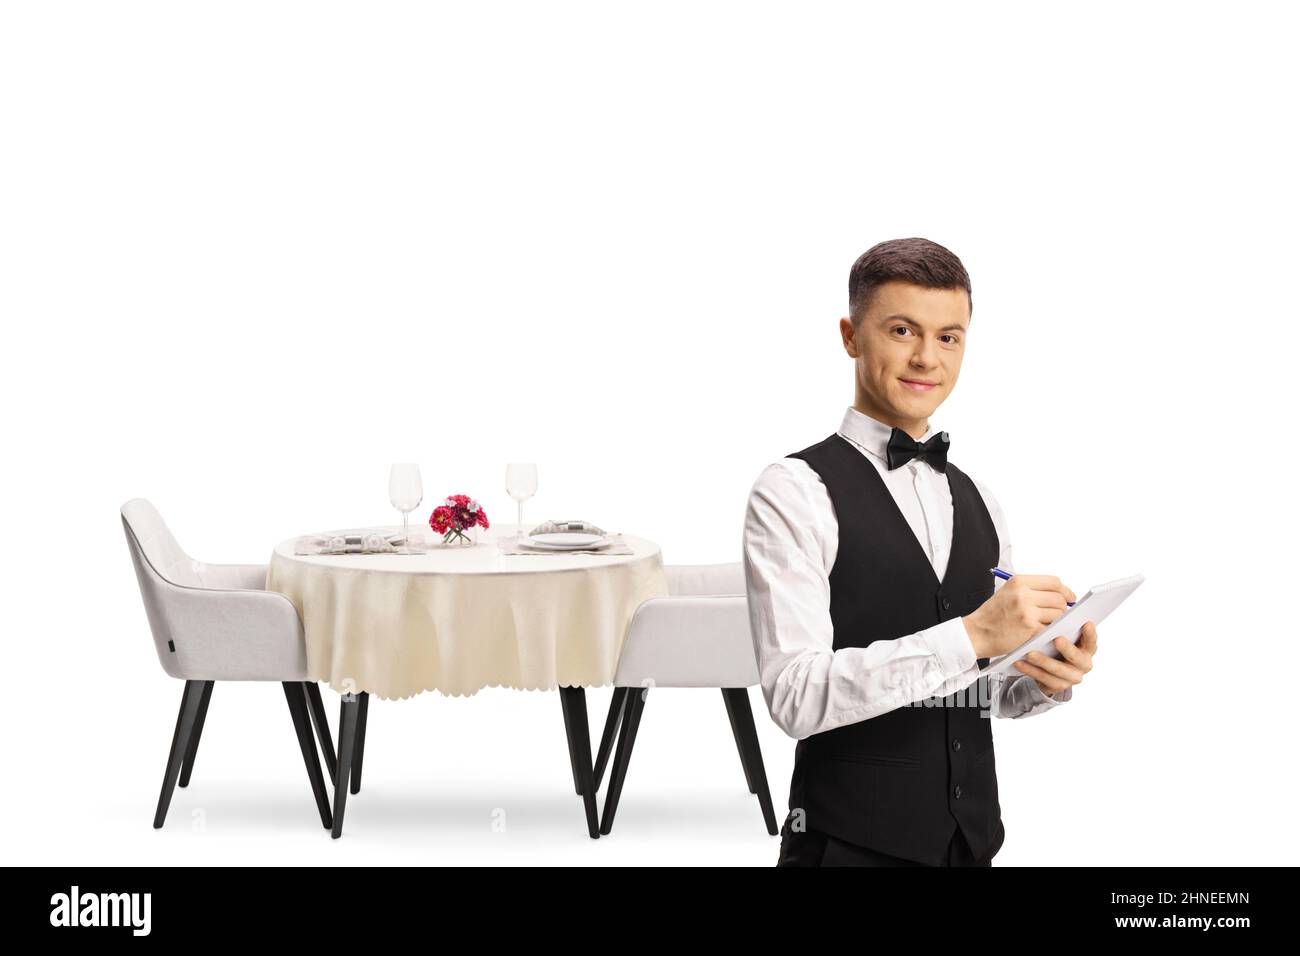 Young male waiter with a bow tie in front of a restaurant table isolated on white background Stock Photo